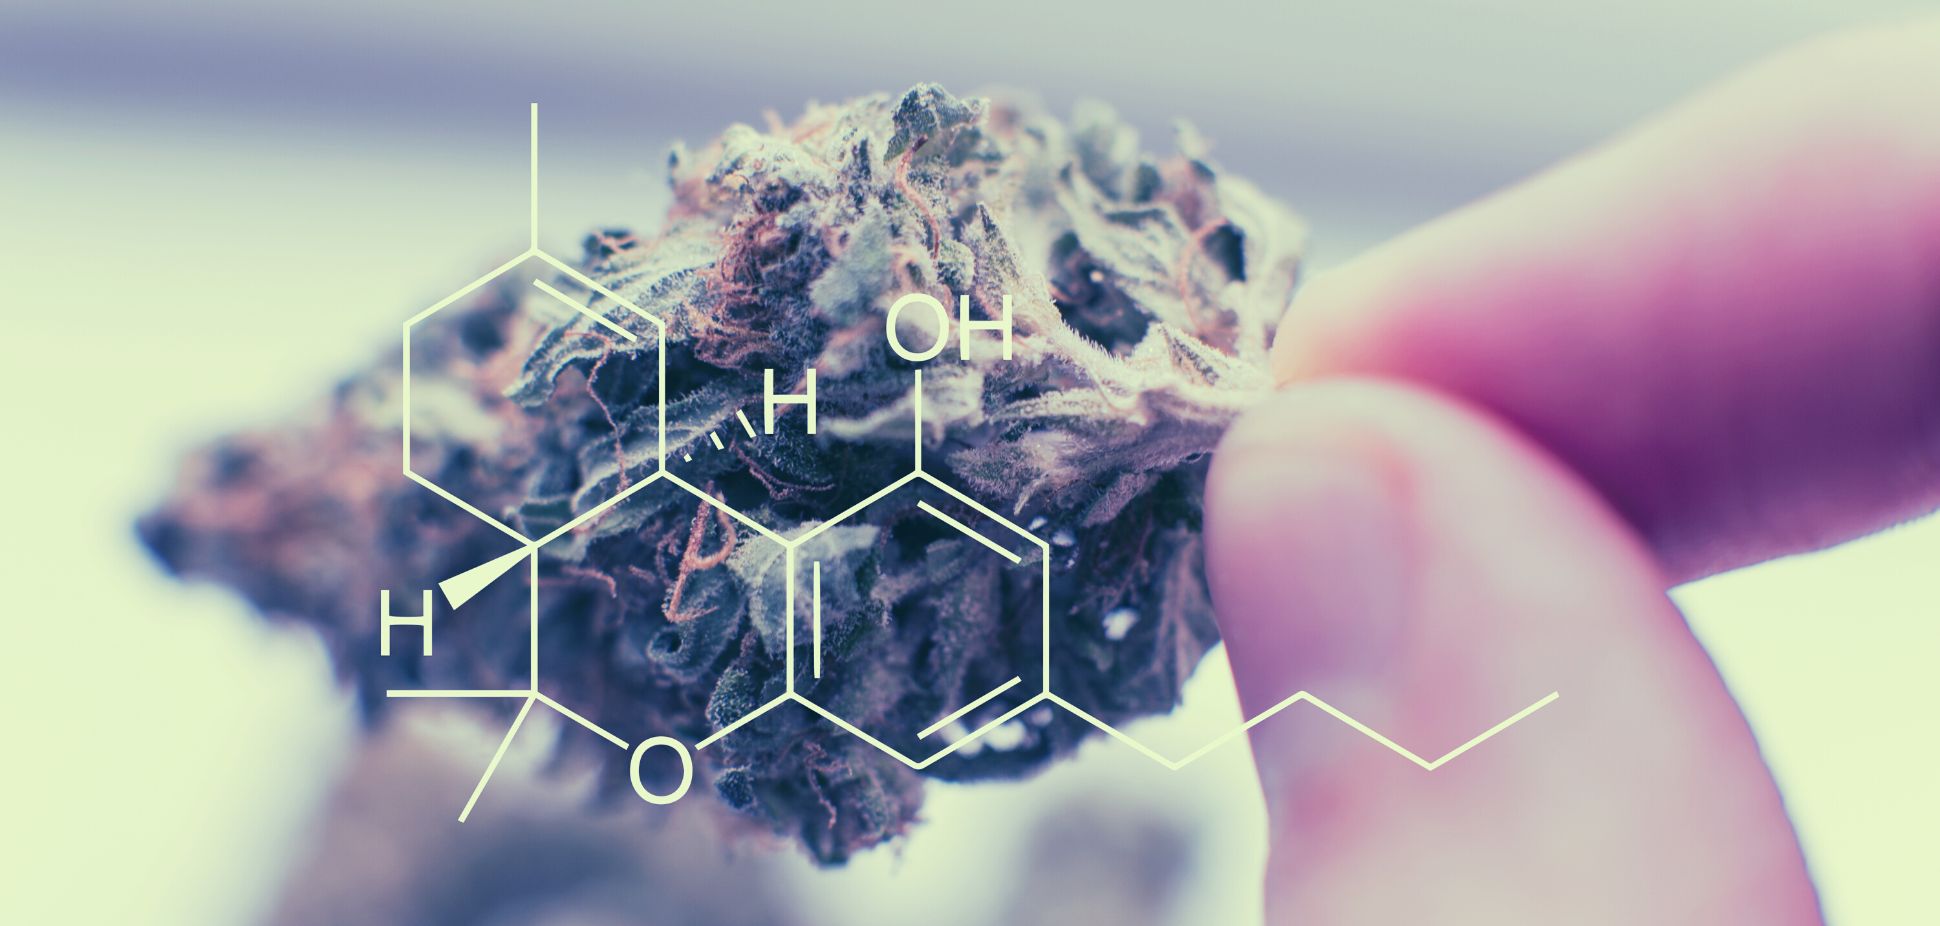 The Truth About THC: Why Cannabis Strength Isn’t Measured by THC Alone